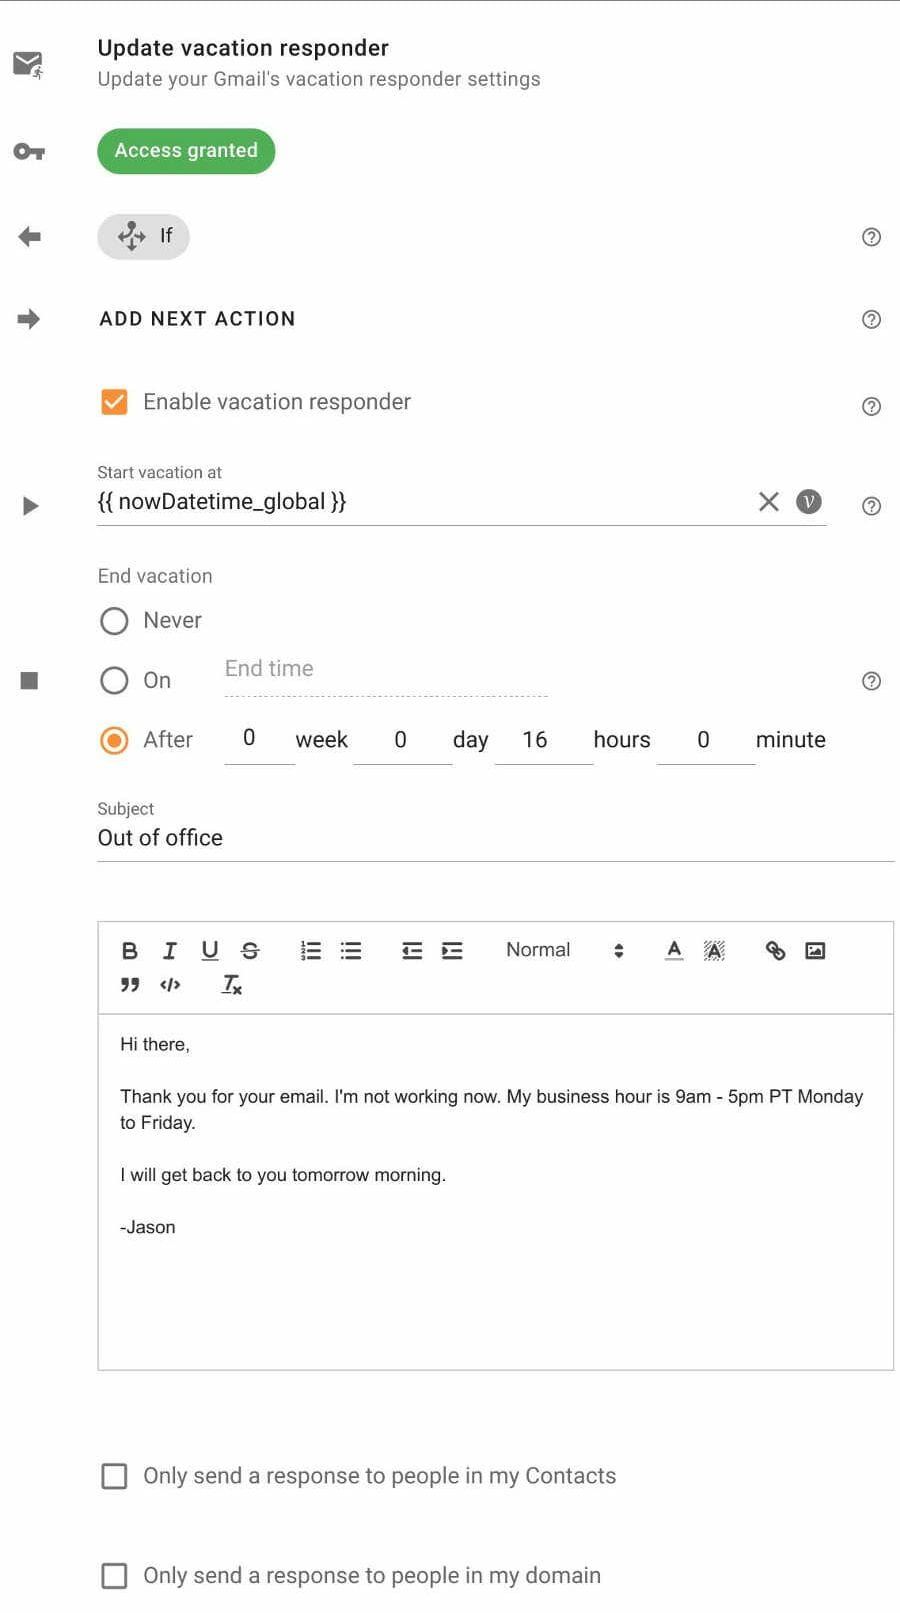 Edit Update vacation responder action in Foresight